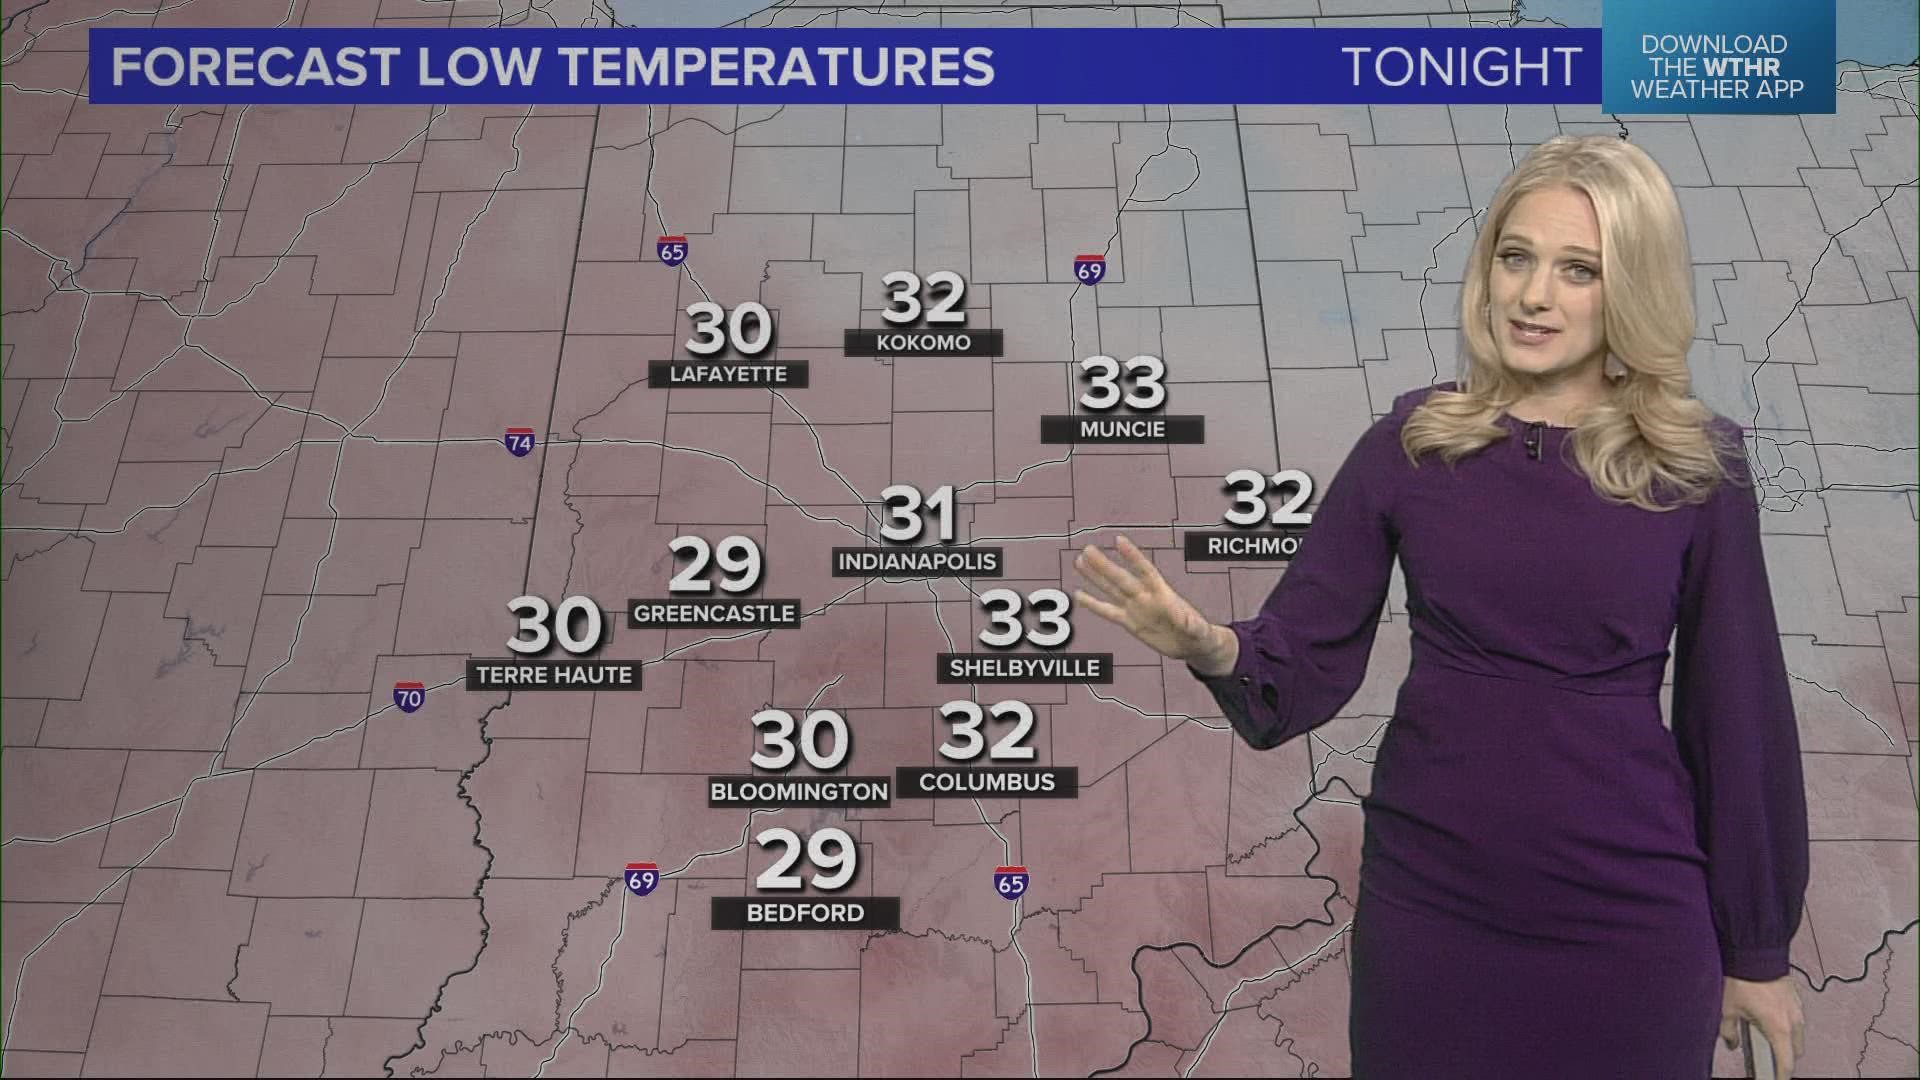 Snow is falling in the northern part of Indiana, while much of central Indiana is under a Freeze Warning overnight.